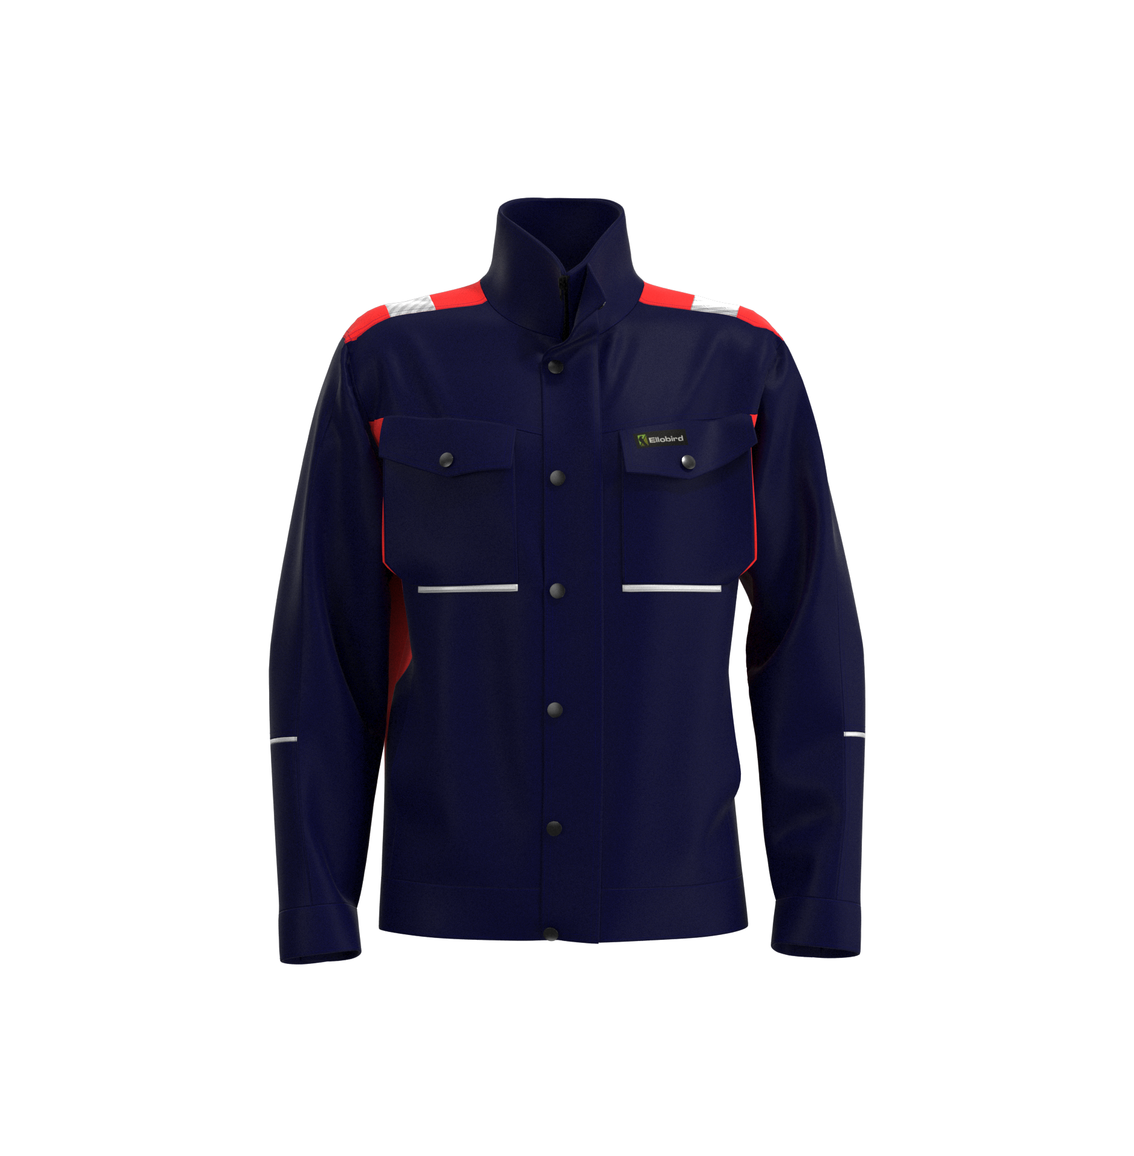 High Quality Working jacket with stand colloar Exporter and Supplier ...